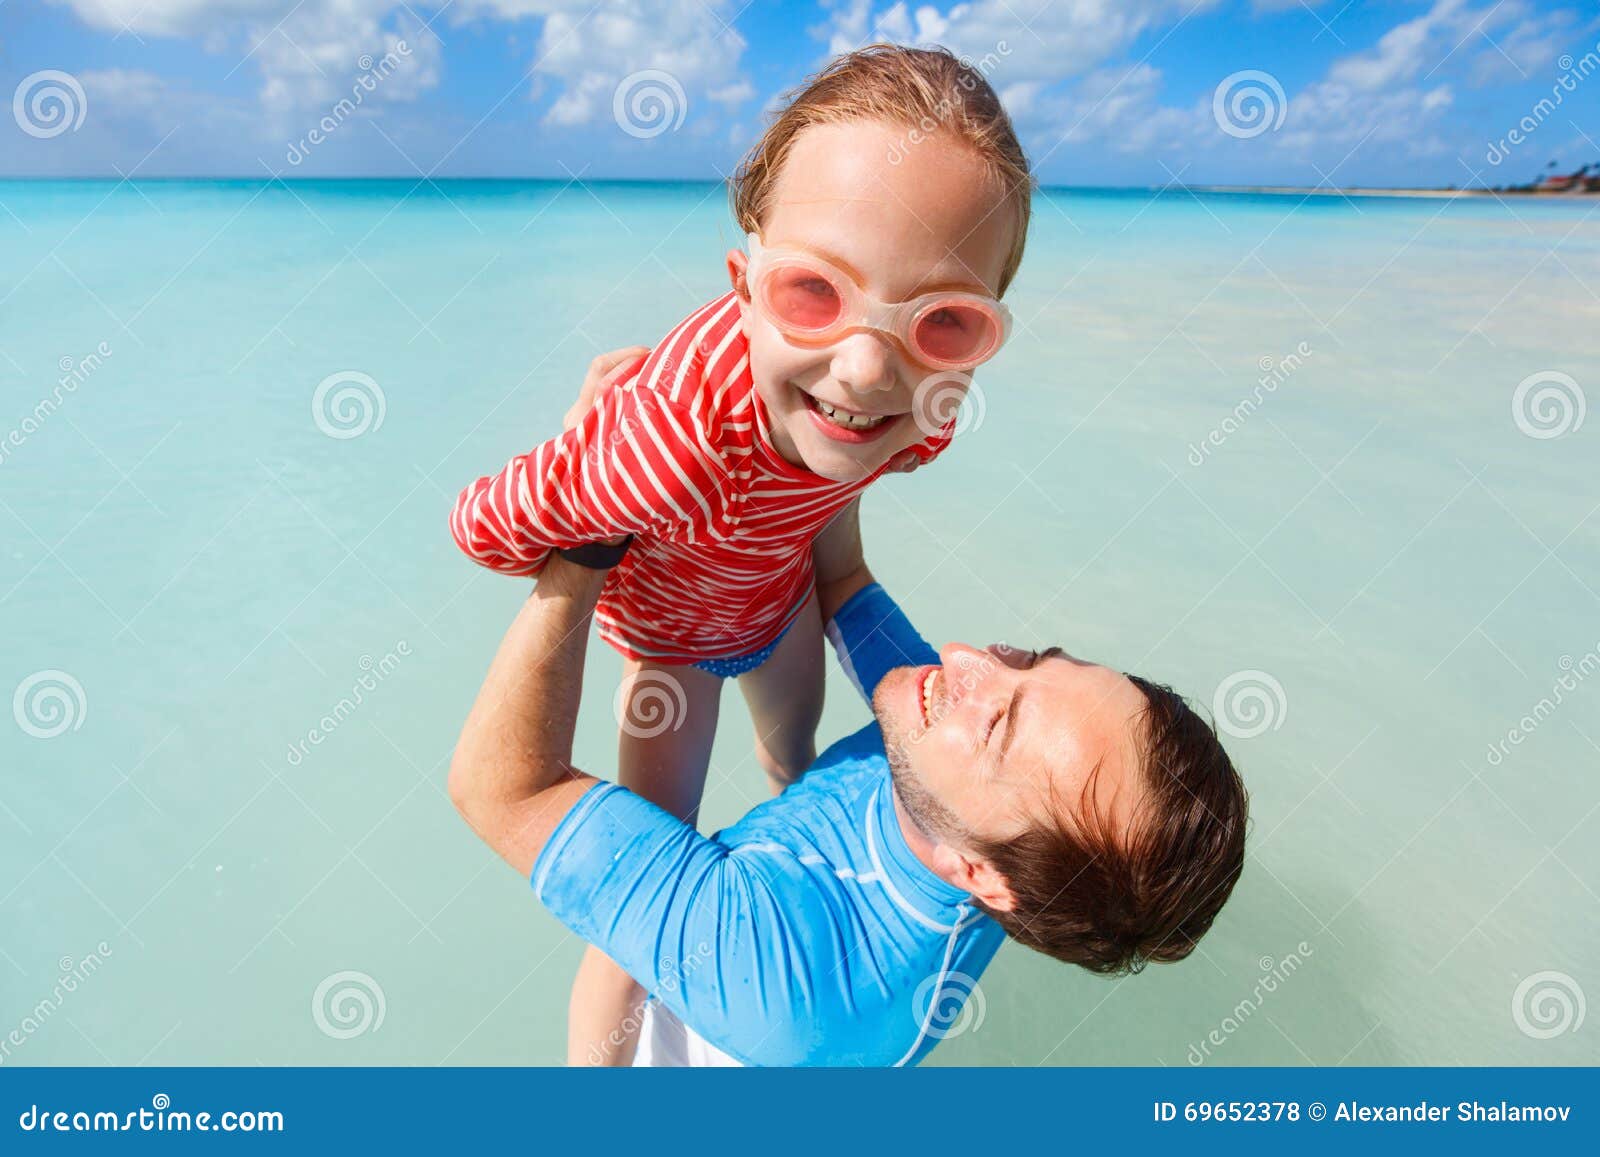 Father And Daughter At Beach Stock Image - Image of daddy 